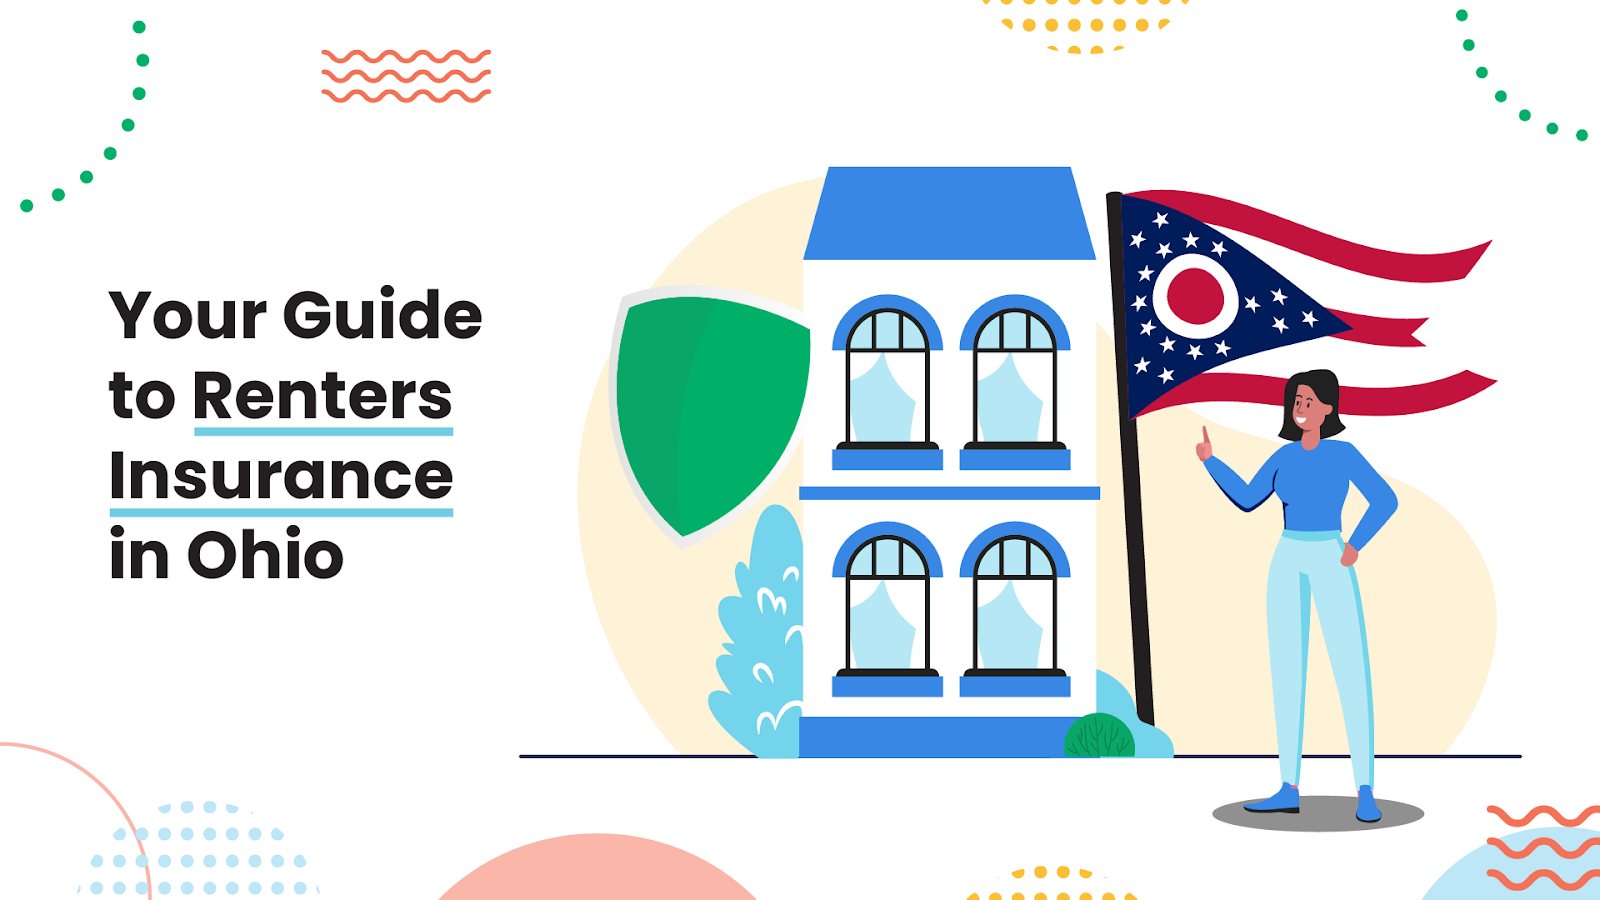 Your starter guide to renters insurance in Ohio.